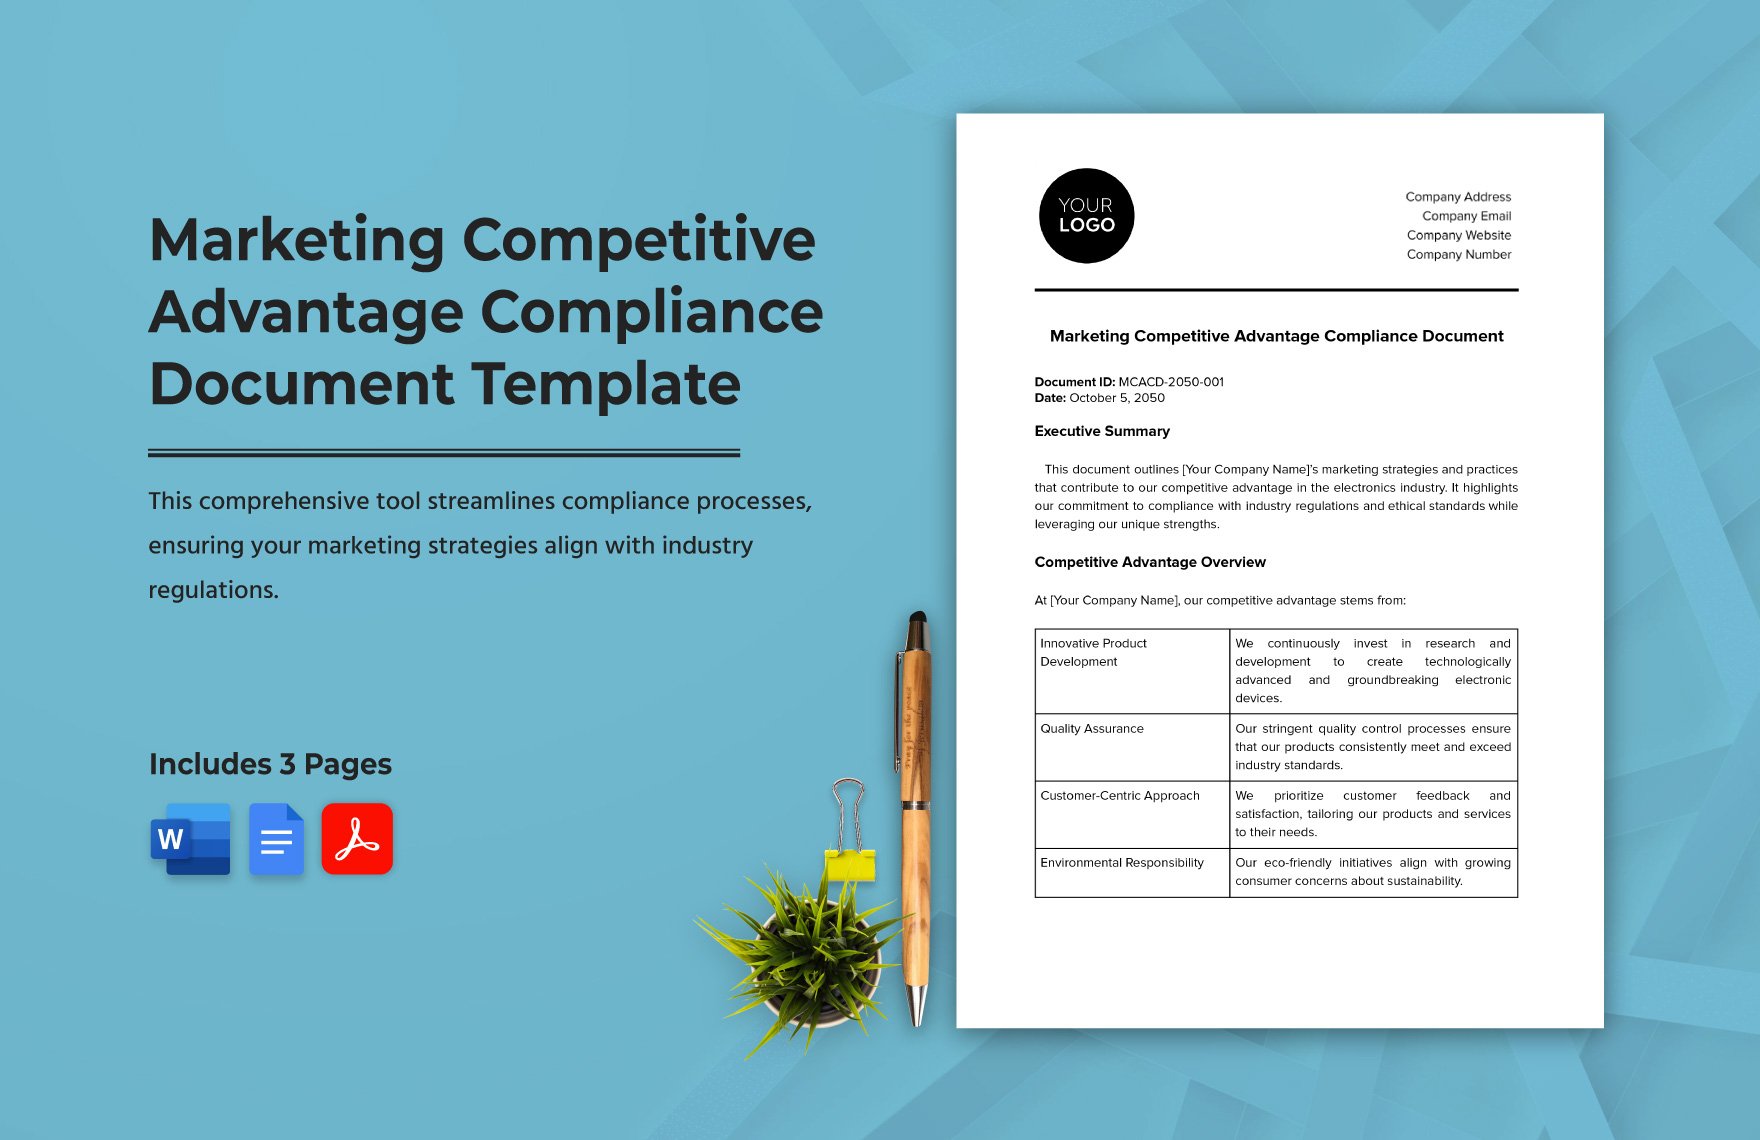 Marketing Competitive Advantage Compliance Document Template  in Word, Google Docs, PDF